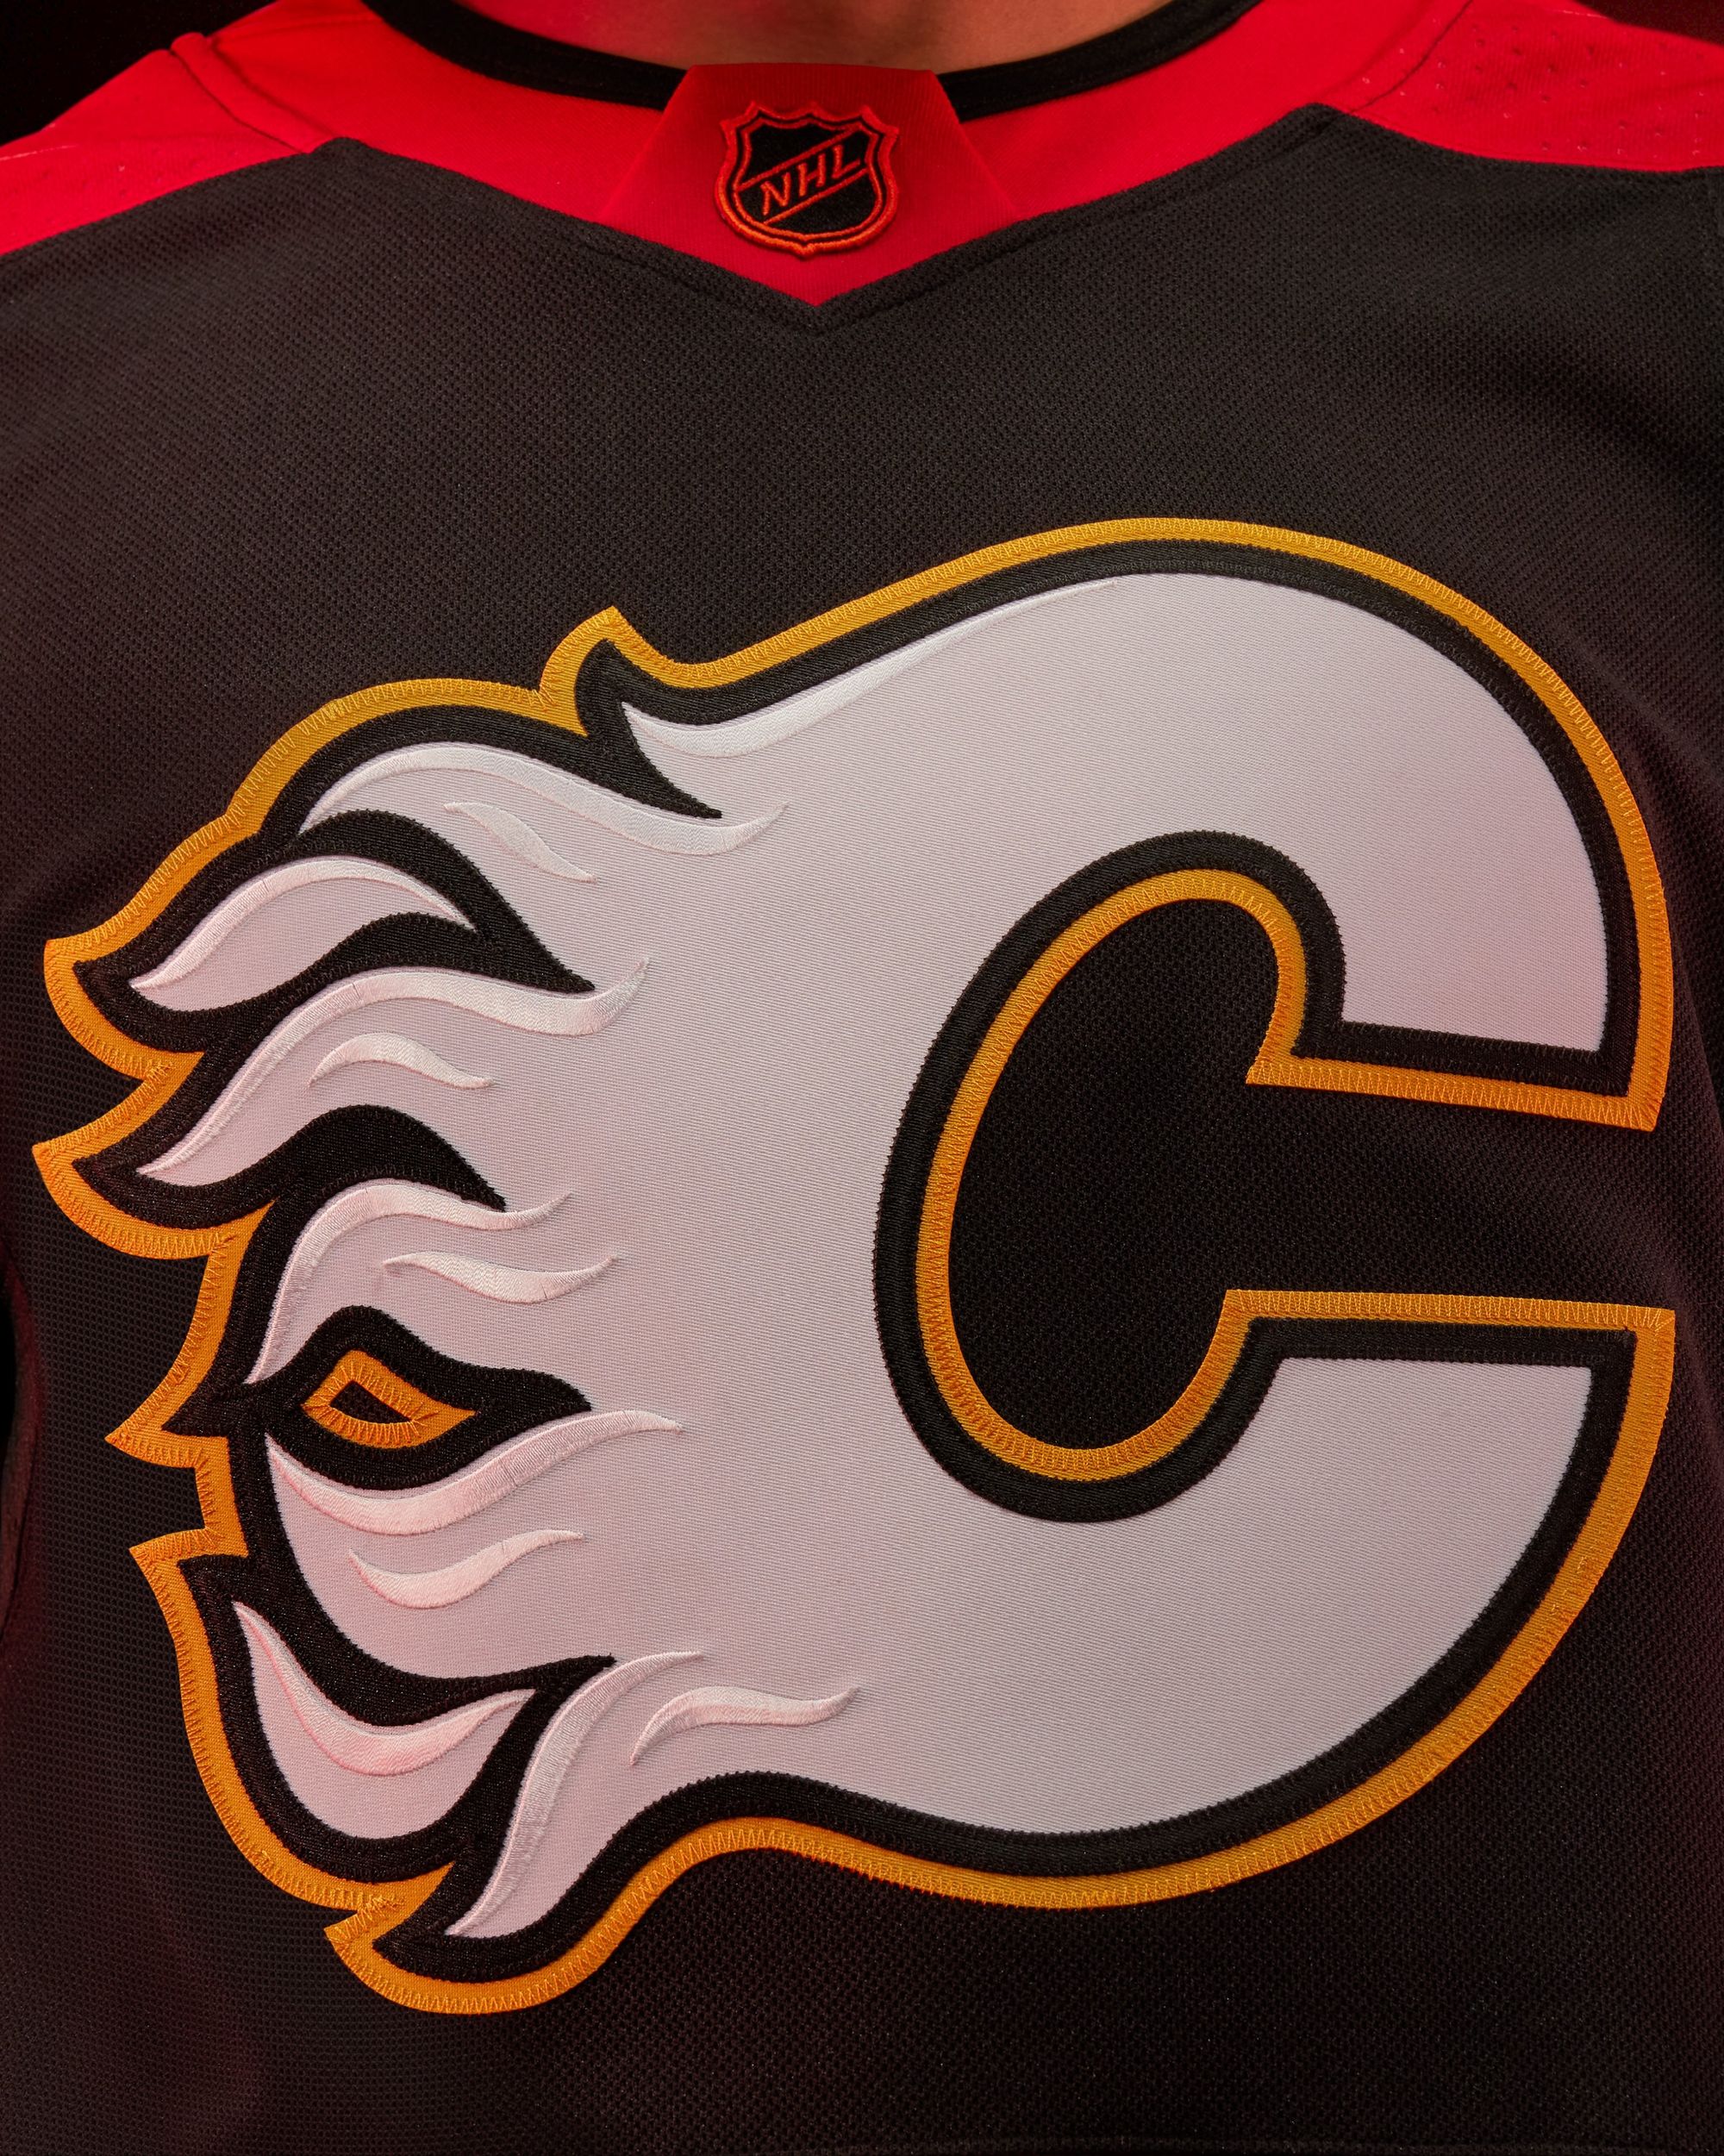 Is there any reason why they stopped the Blasty jerseys as an alternate? :  r/CalgaryFlames